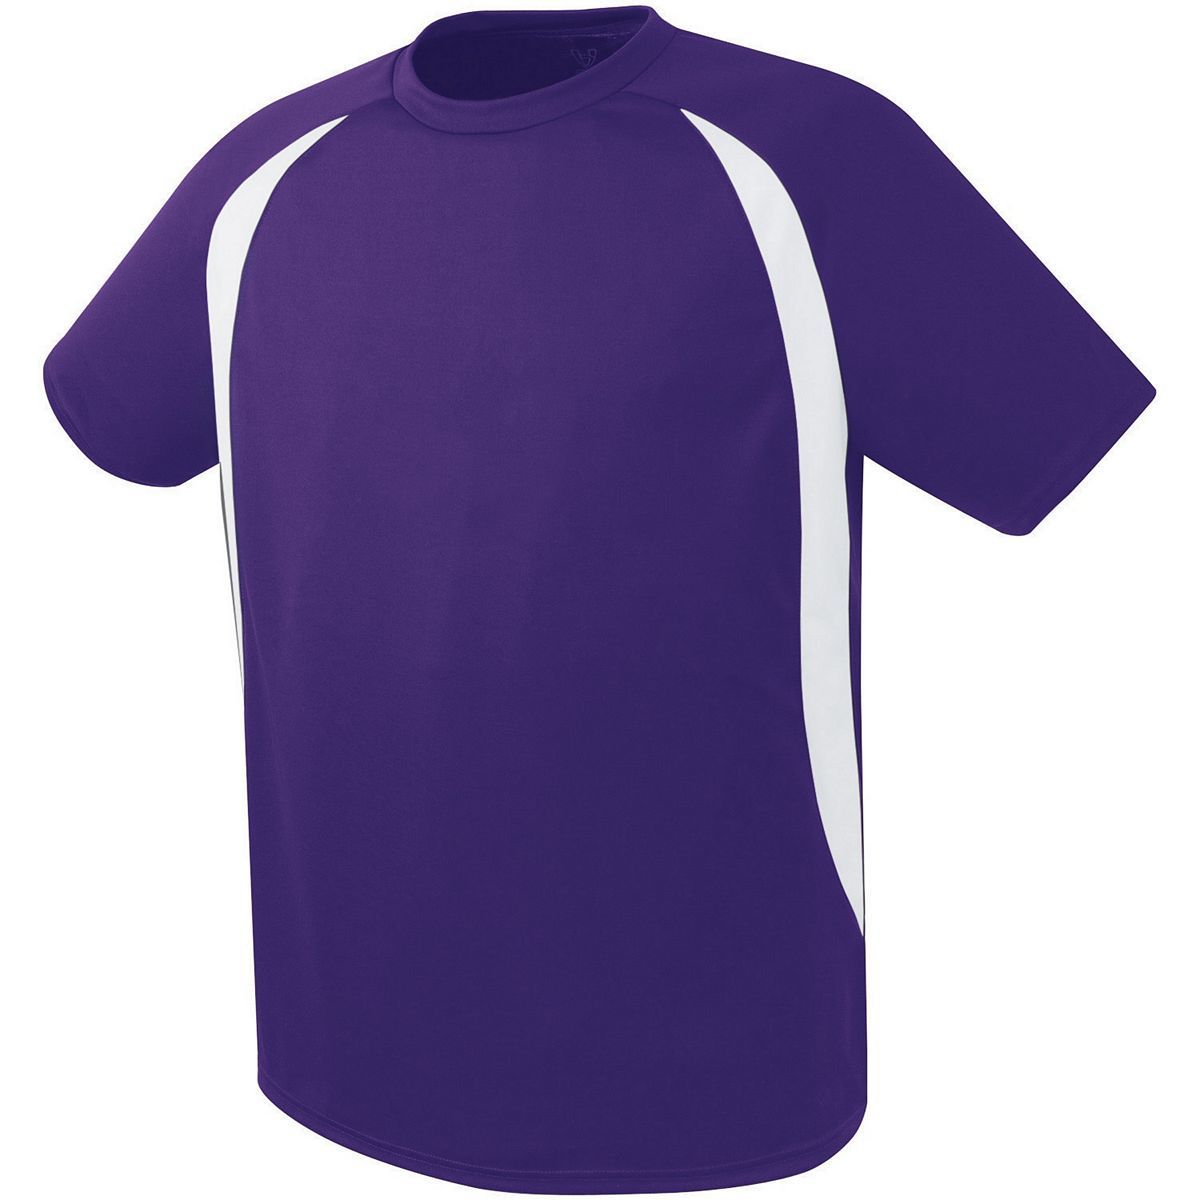 High 5 Youth Liberty Soccer Jersey in Purple/White  -Part of the Youth, Youth-Jersey, High5-Products, Soccer, Shirts, All-Sports-1 product lines at KanaleyCreations.com